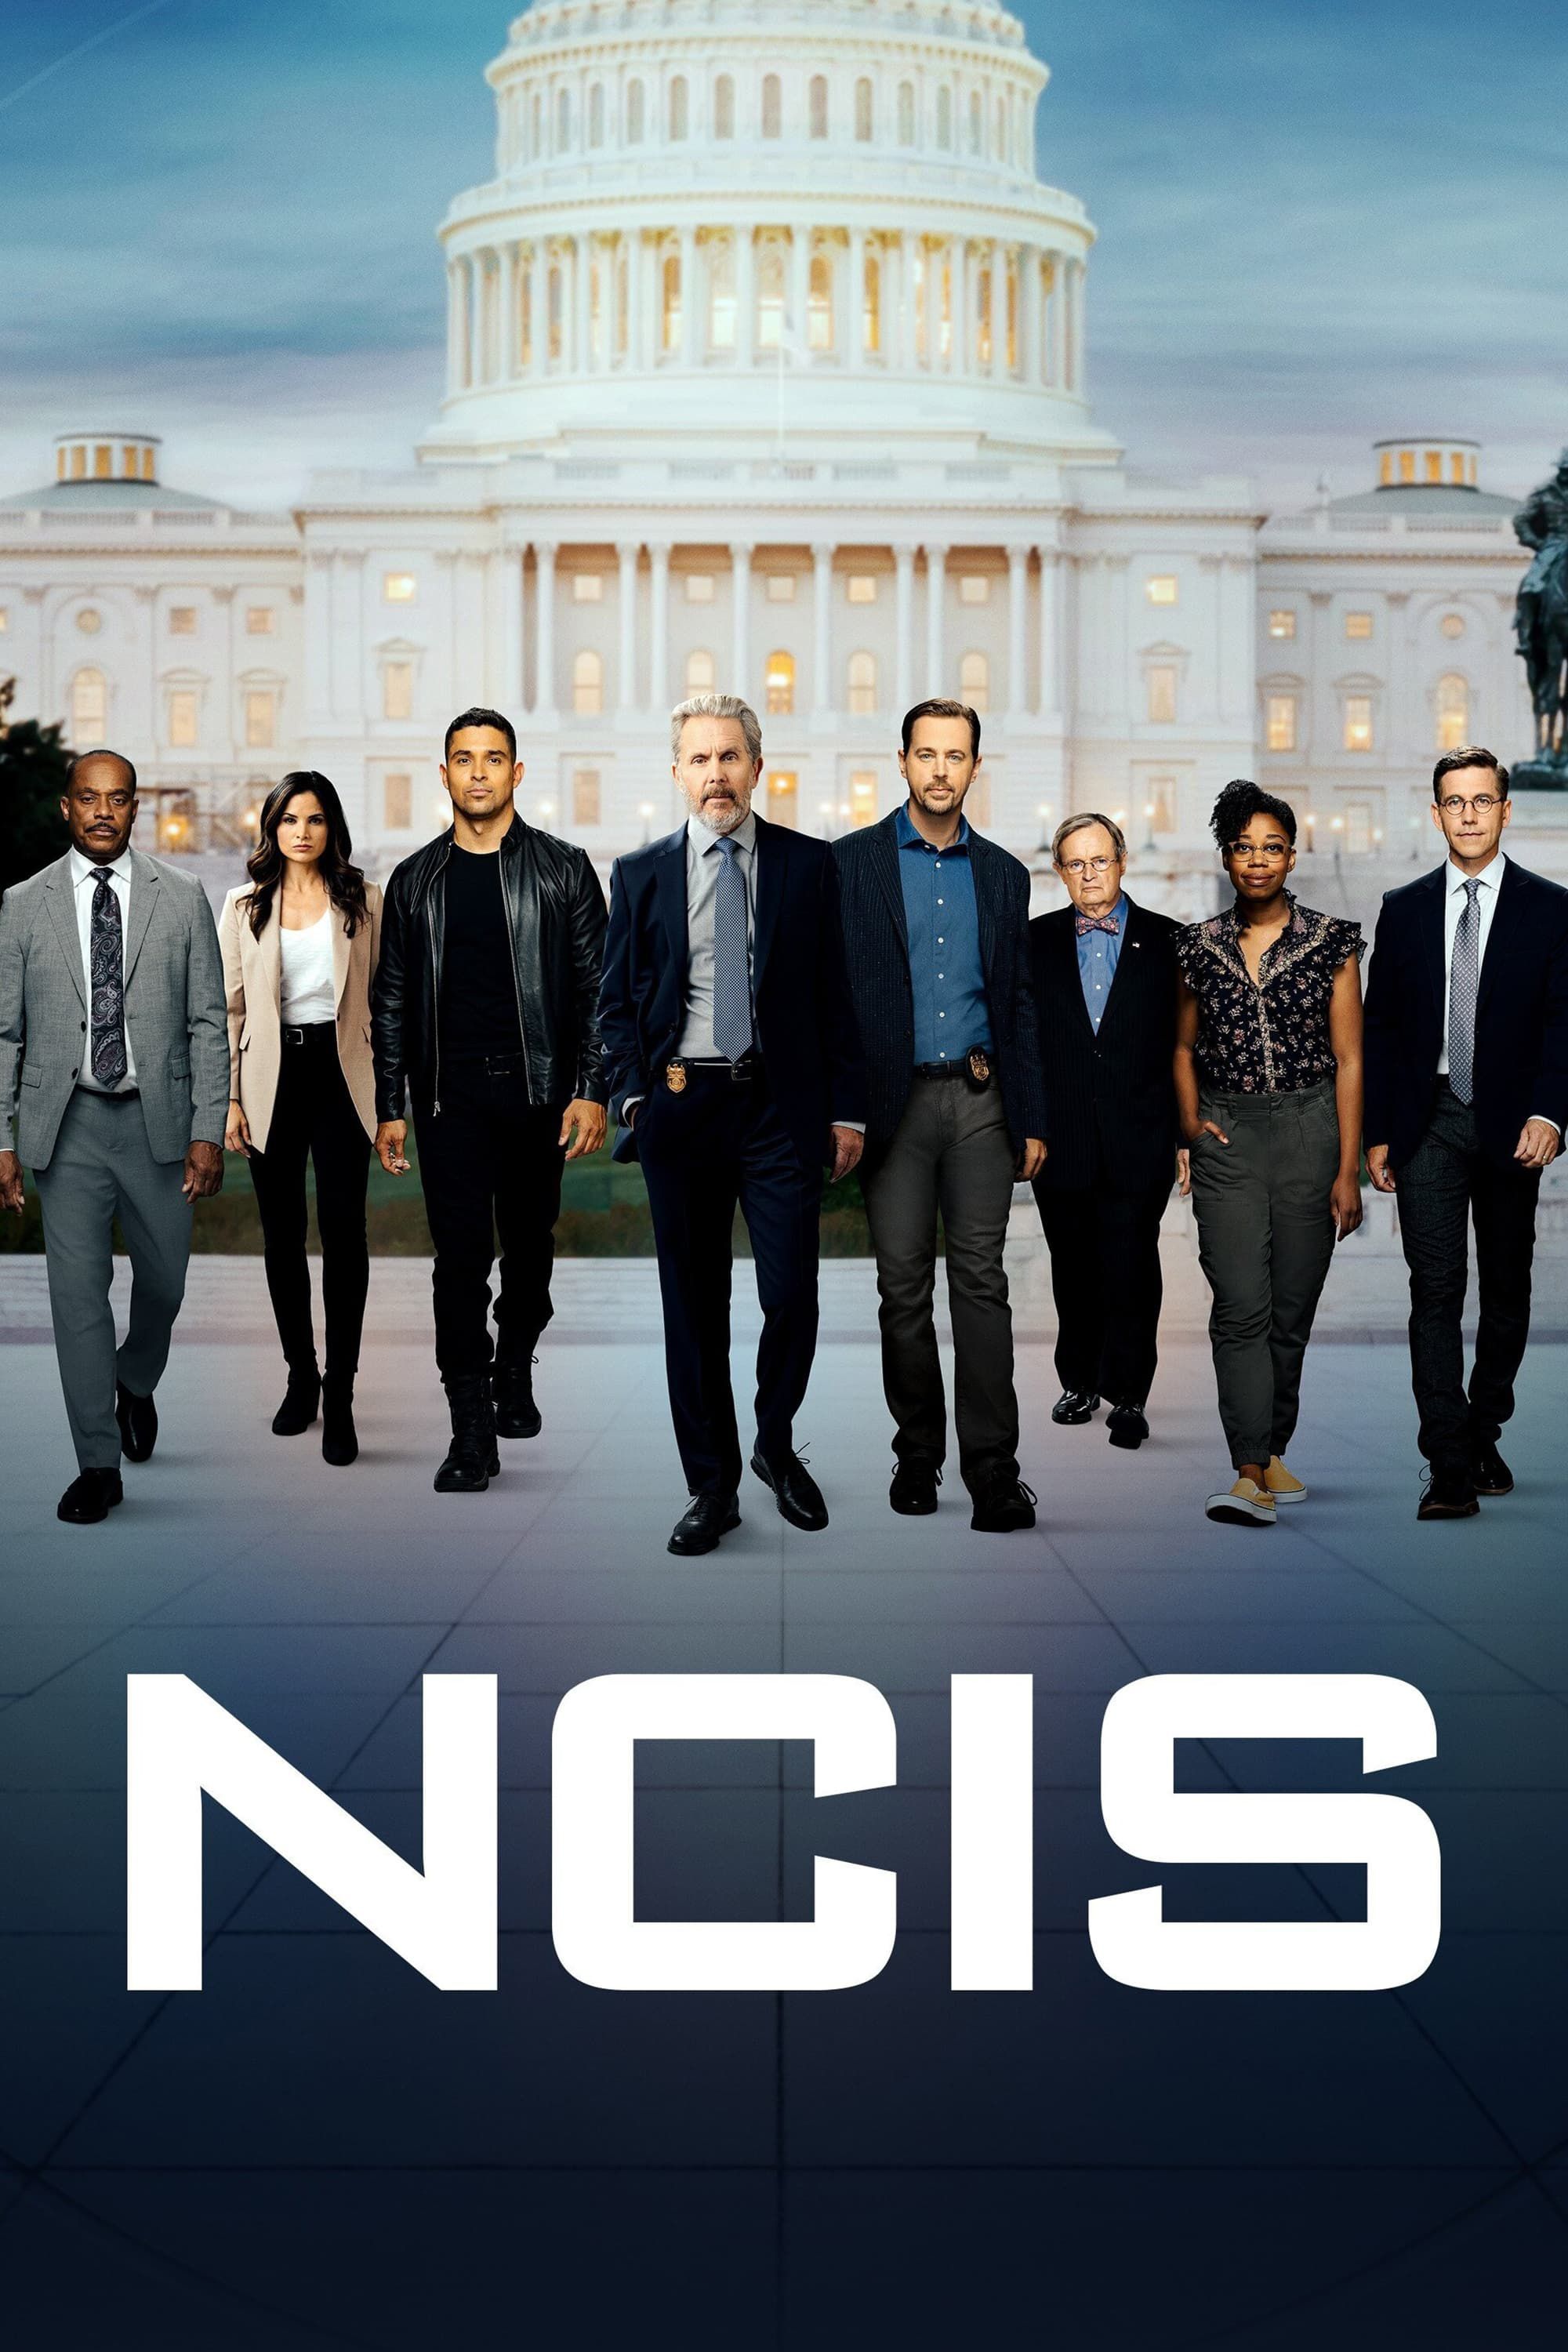 The cast of NCIS season 20 walks forward above show title in promotional poster